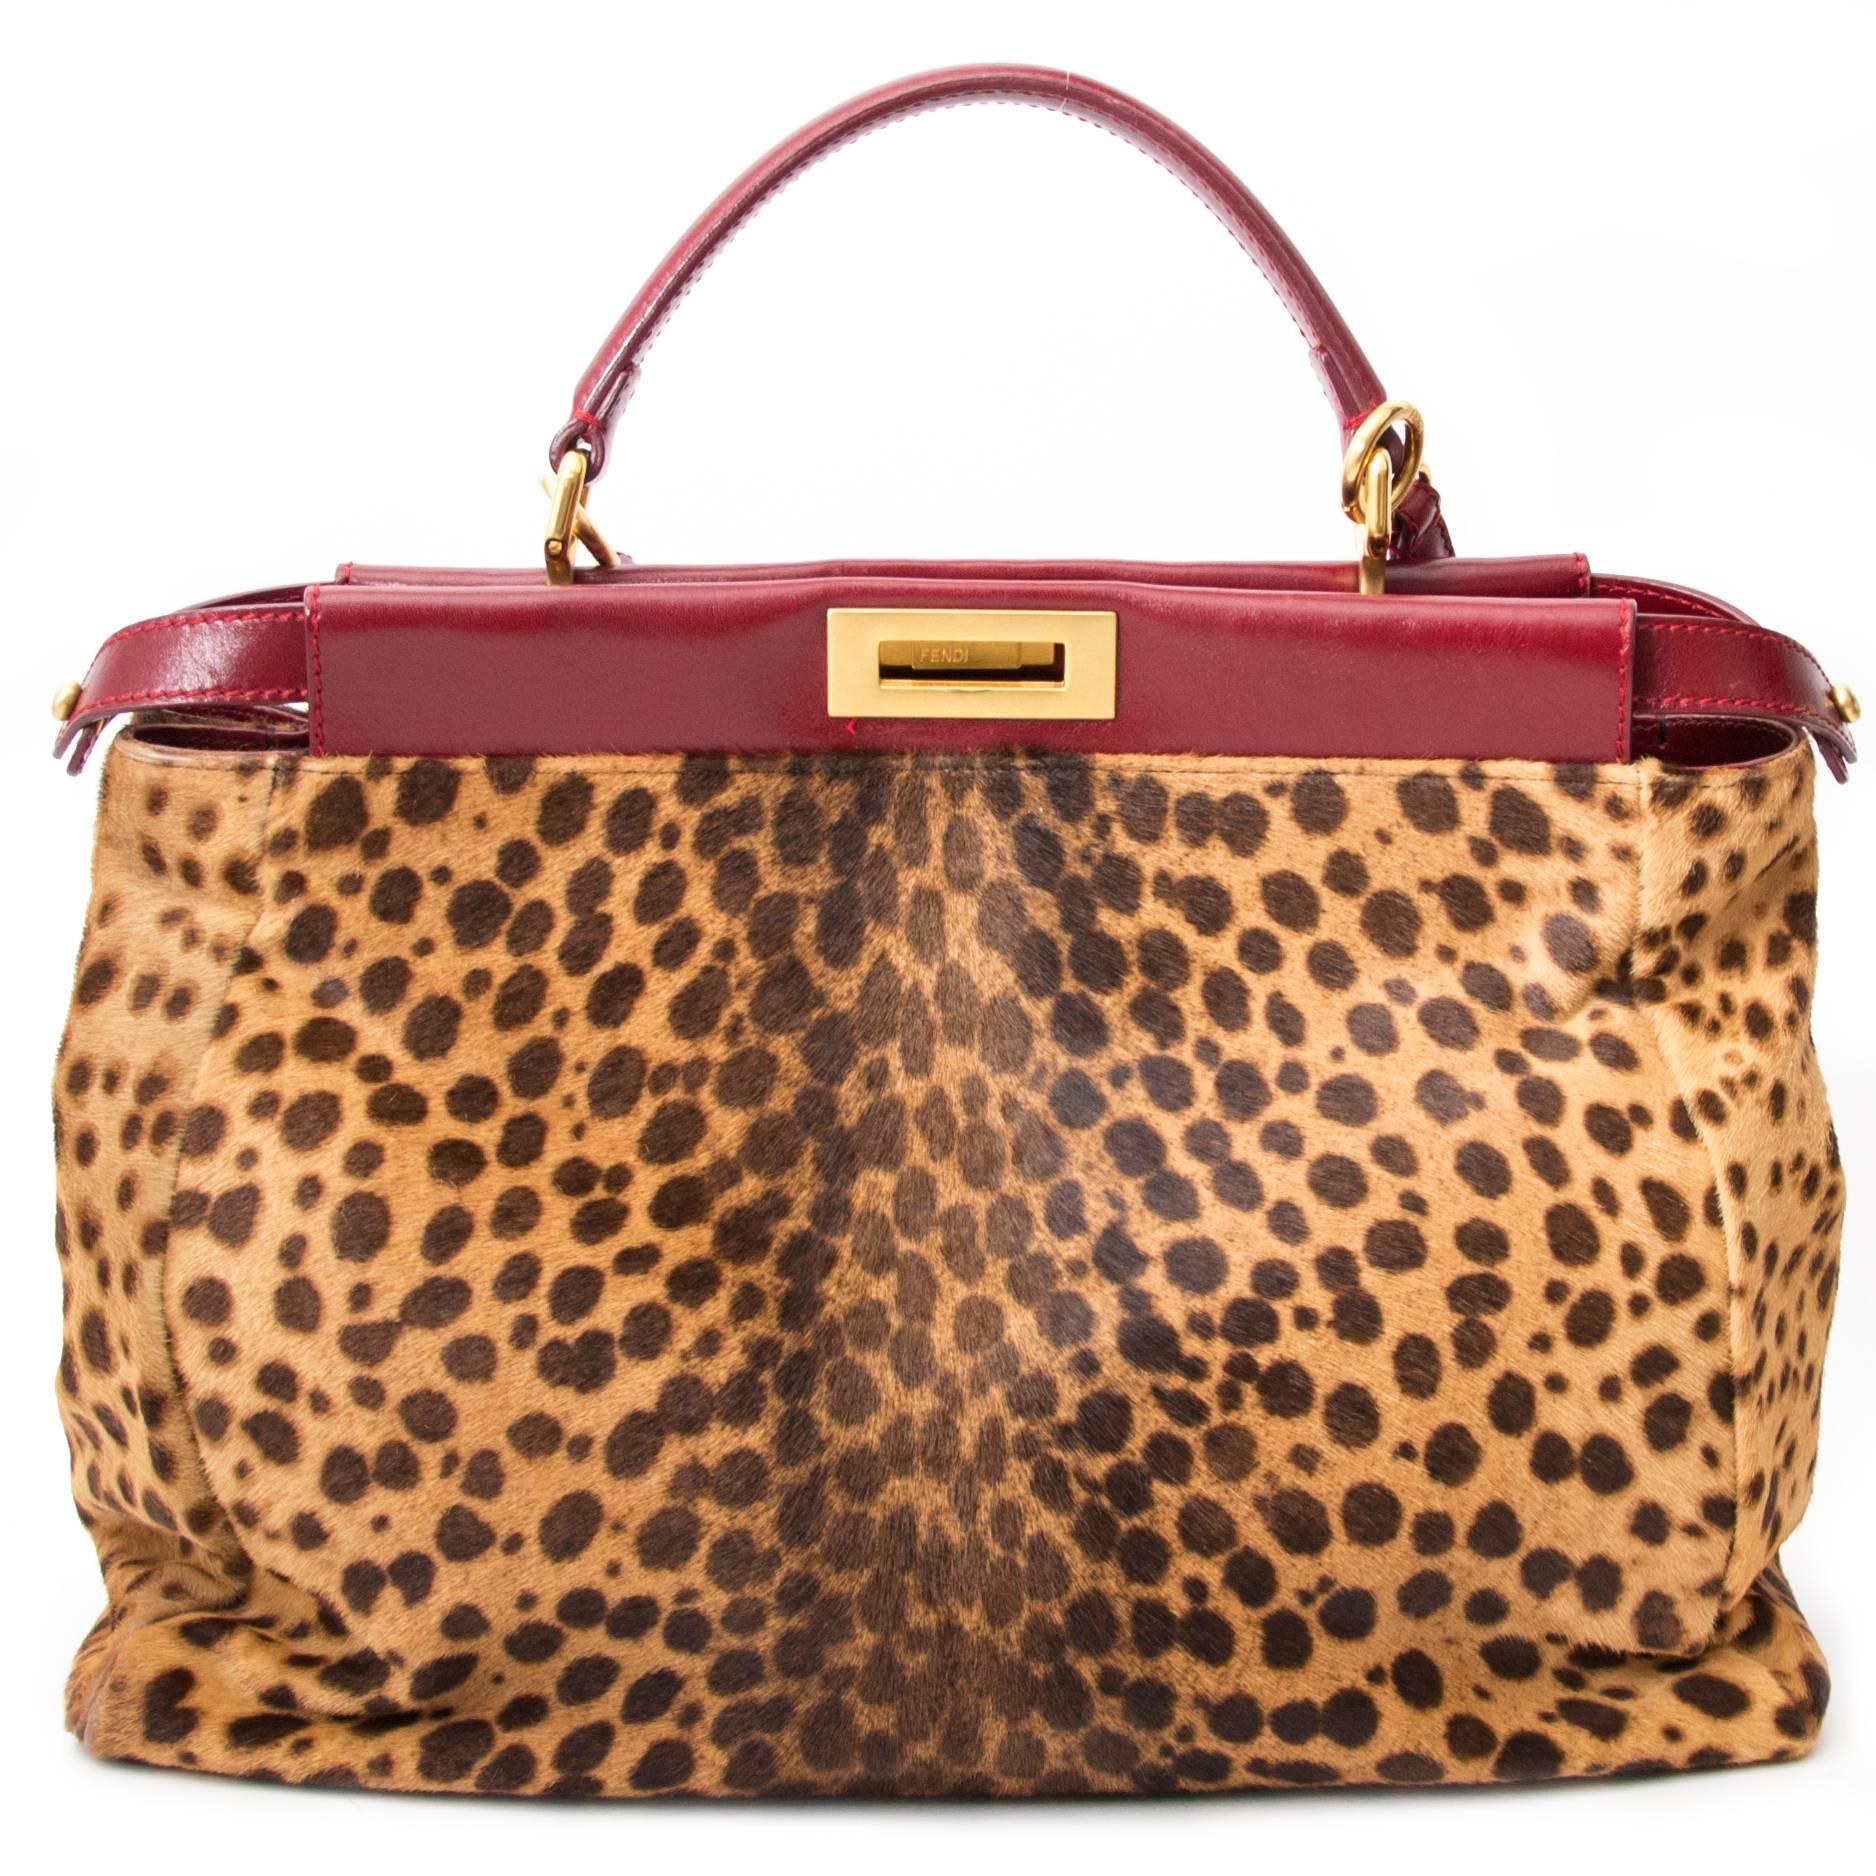 This lovely Fendi Peekaboo in a large size features burgundy leather and leopard print pony hair. The bag has a detachable shoulder strap. In very nice condition.  Branded gold toned turnlock hardware. Interior is two large compartments lined in the